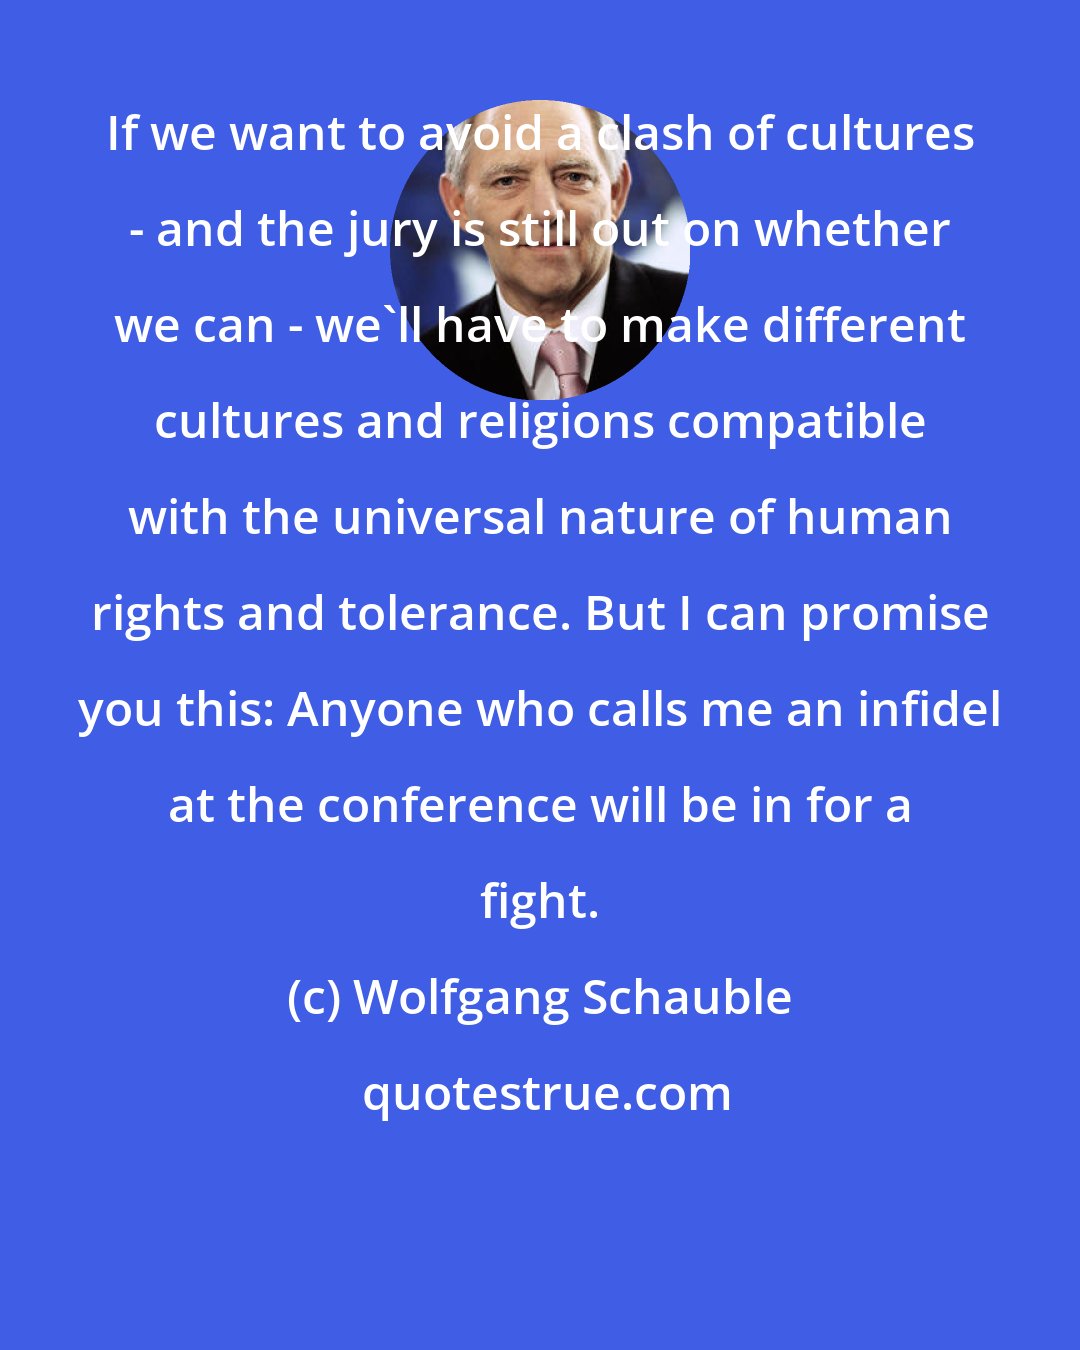 Wolfgang Schauble: If we want to avoid a clash of cultures - and the jury is still out on whether we can - we'll have to make different cultures and religions compatible with the universal nature of human rights and tolerance. But I can promise you this: Anyone who calls me an infidel at the conference will be in for a fight.